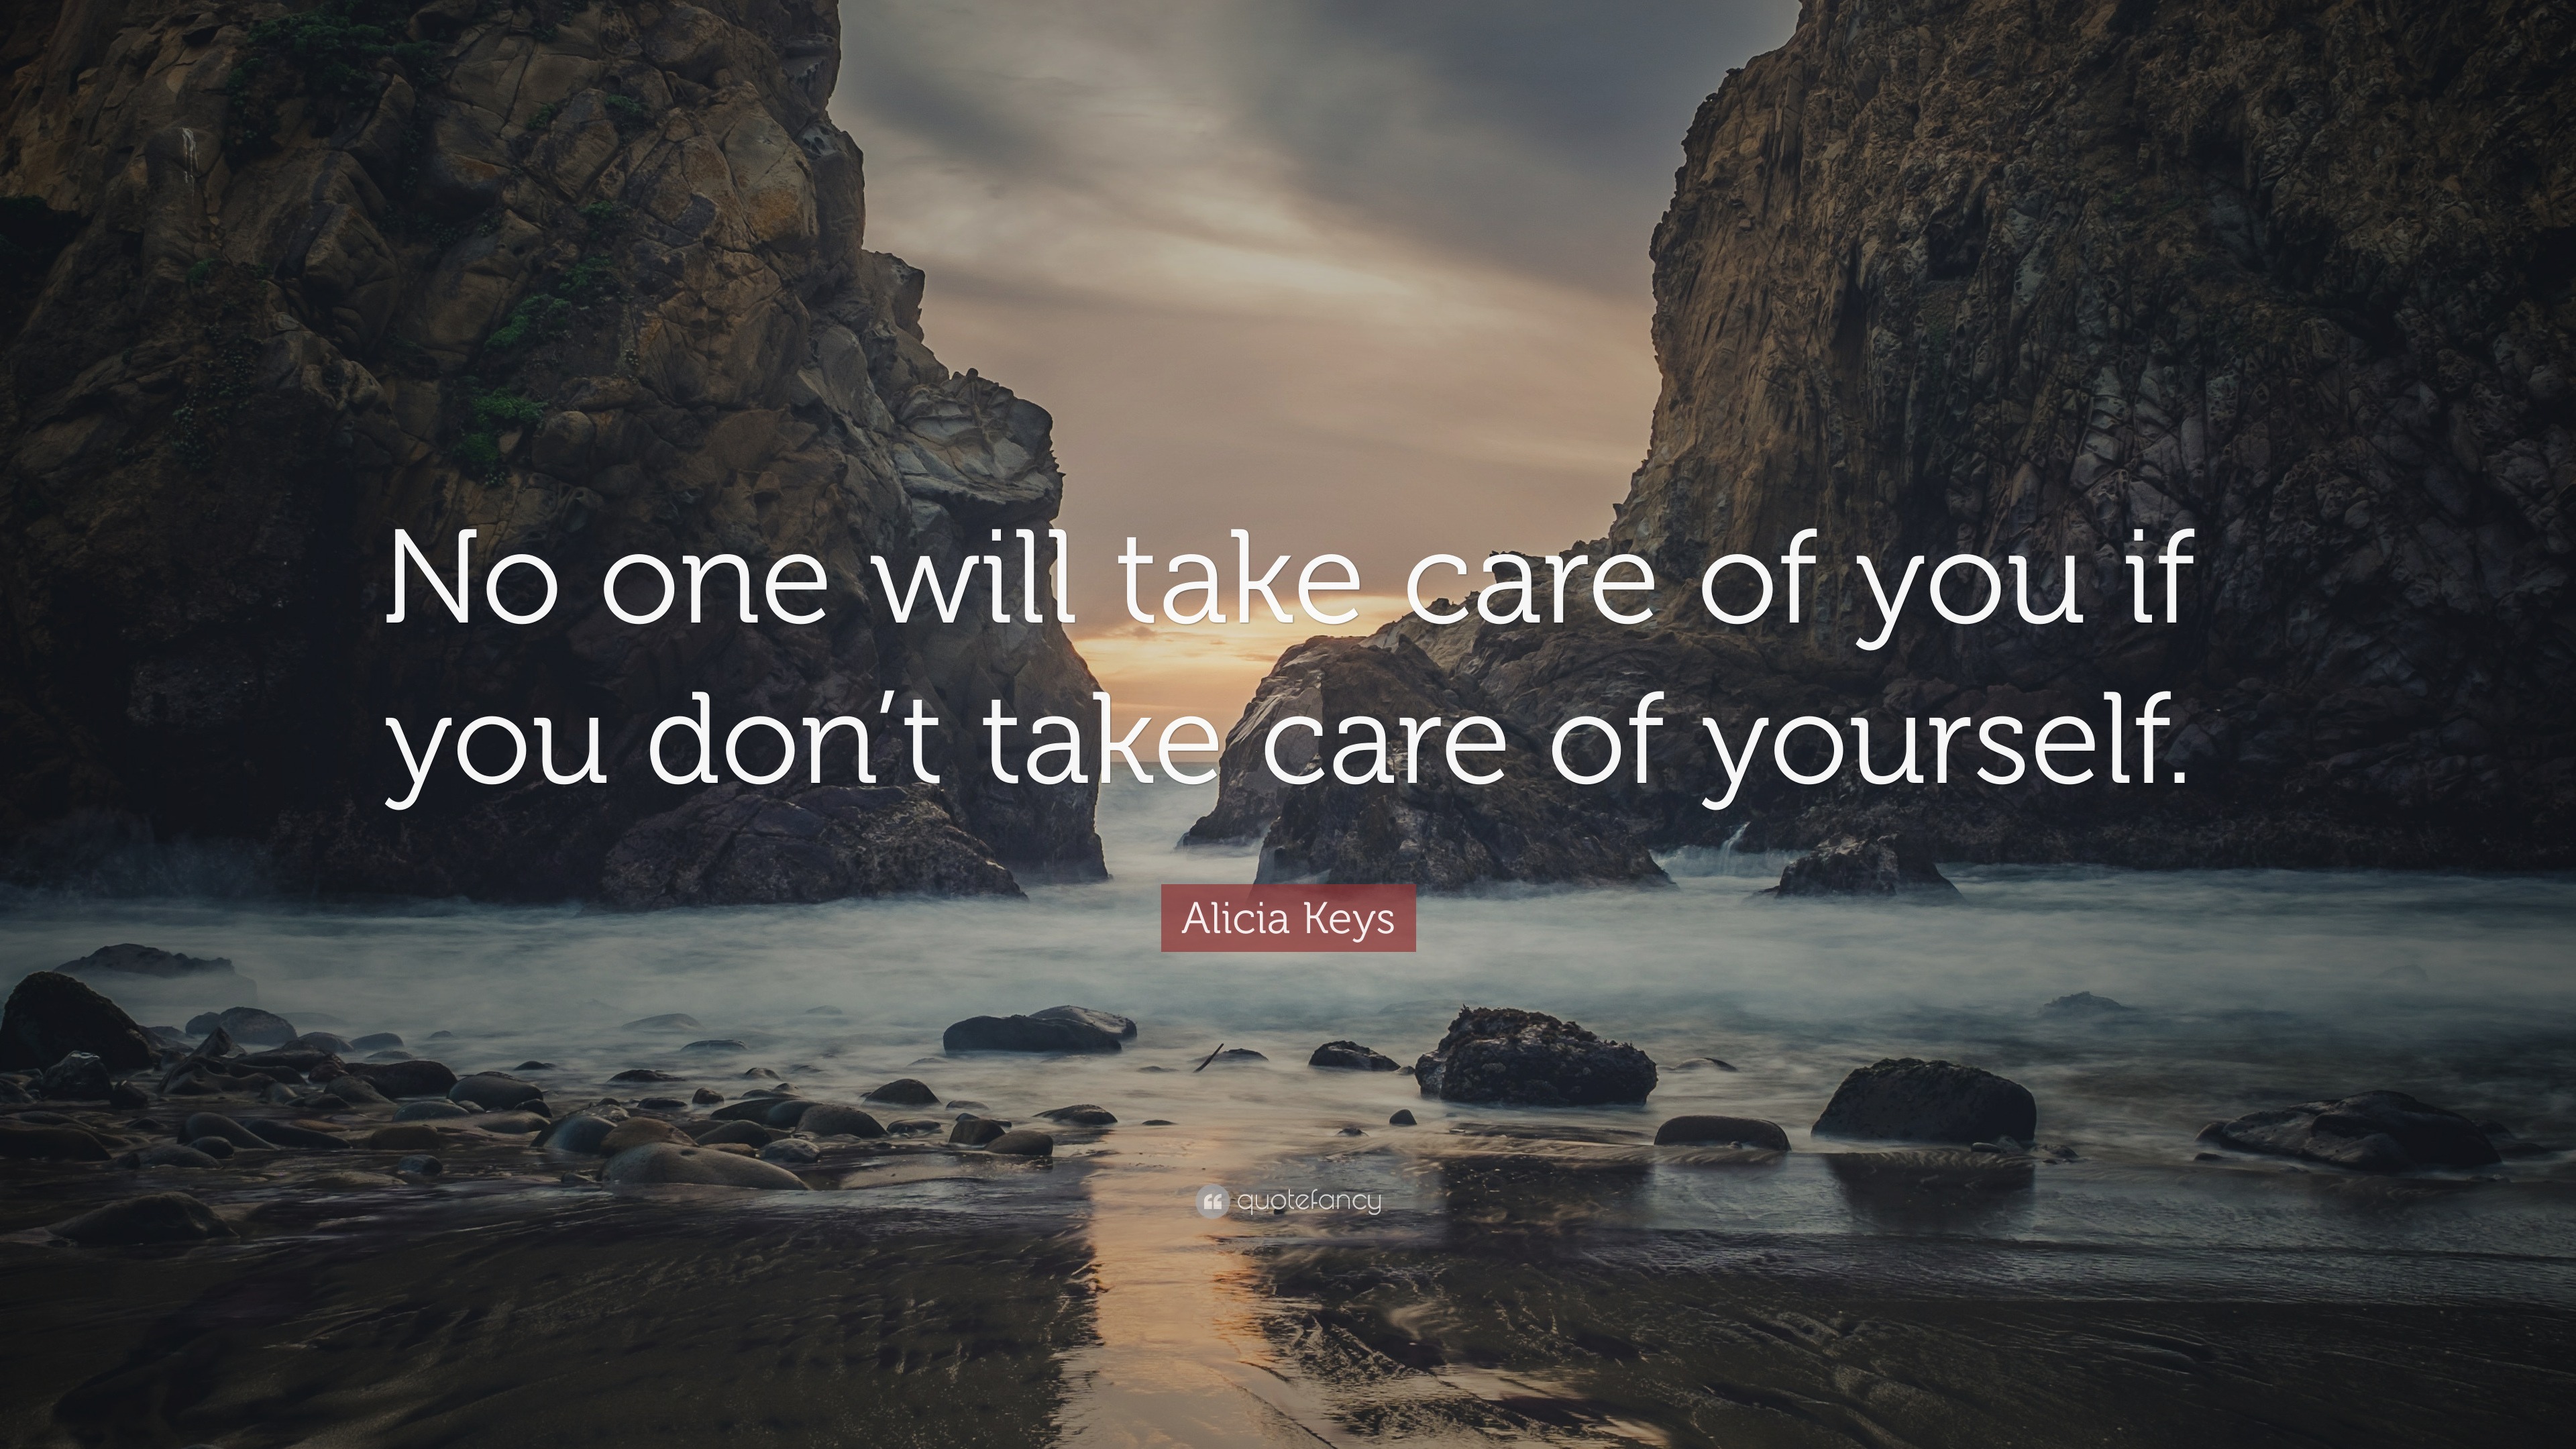 Alicia Keys Quote: “No one will take care of you if you don’t take care ...